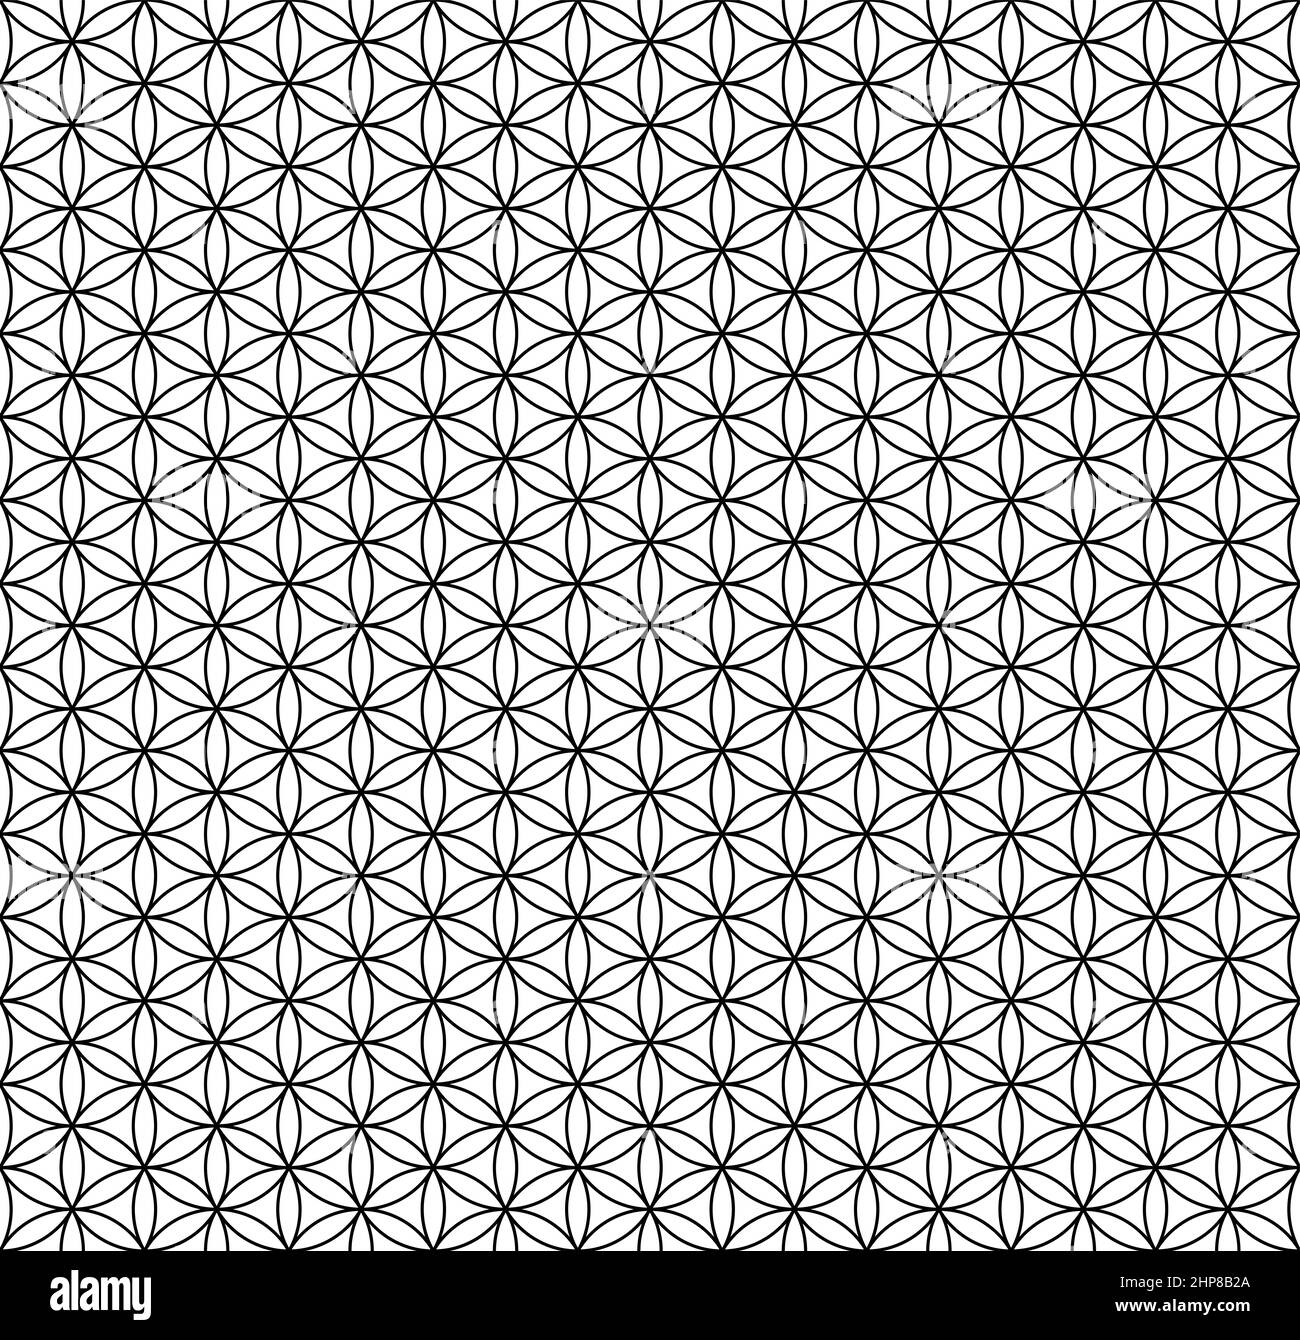 Flower of Life pattern, and seamless tile to use as a background. Hexagonal arranged circles, generate a flower petal pattern. Stock Photo